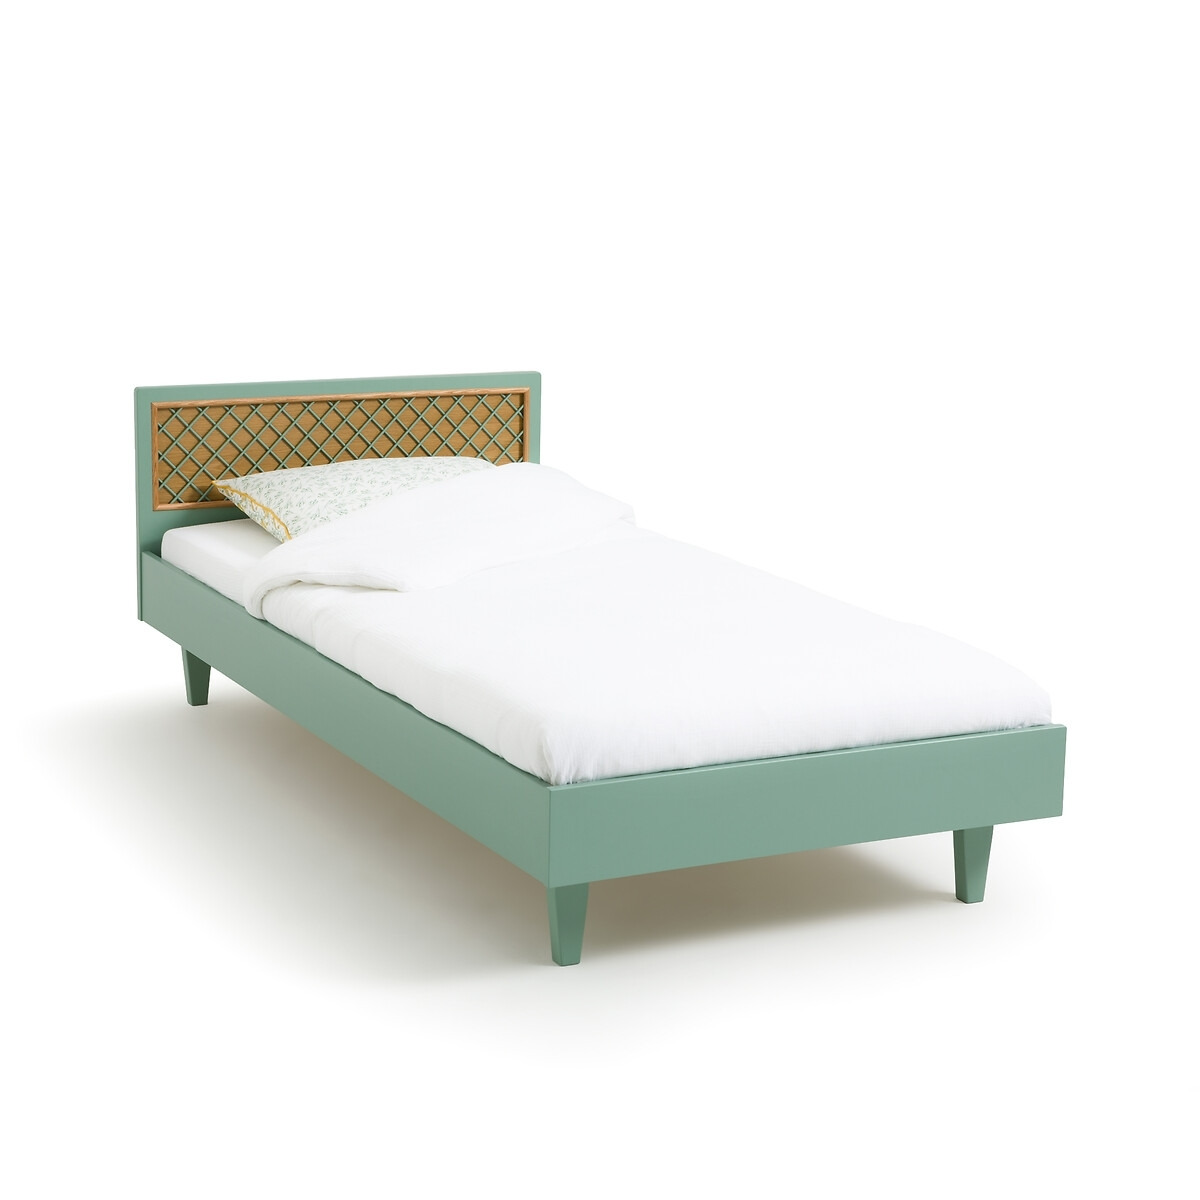 Croisille Children's Bed with Headboard - image 1